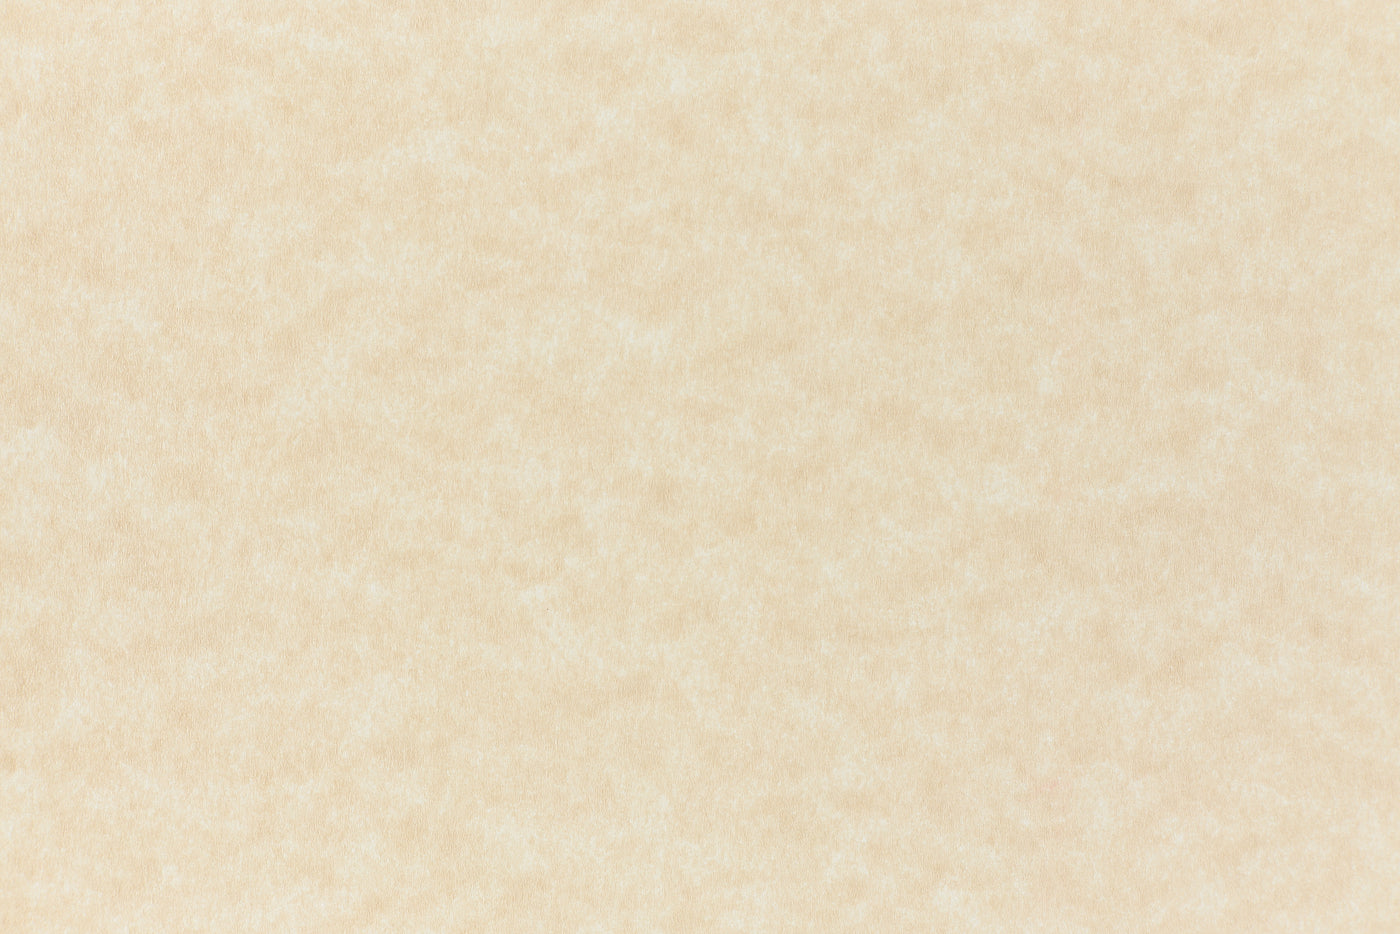 Aged Parchment Paper (Parchtone, Text Weight)